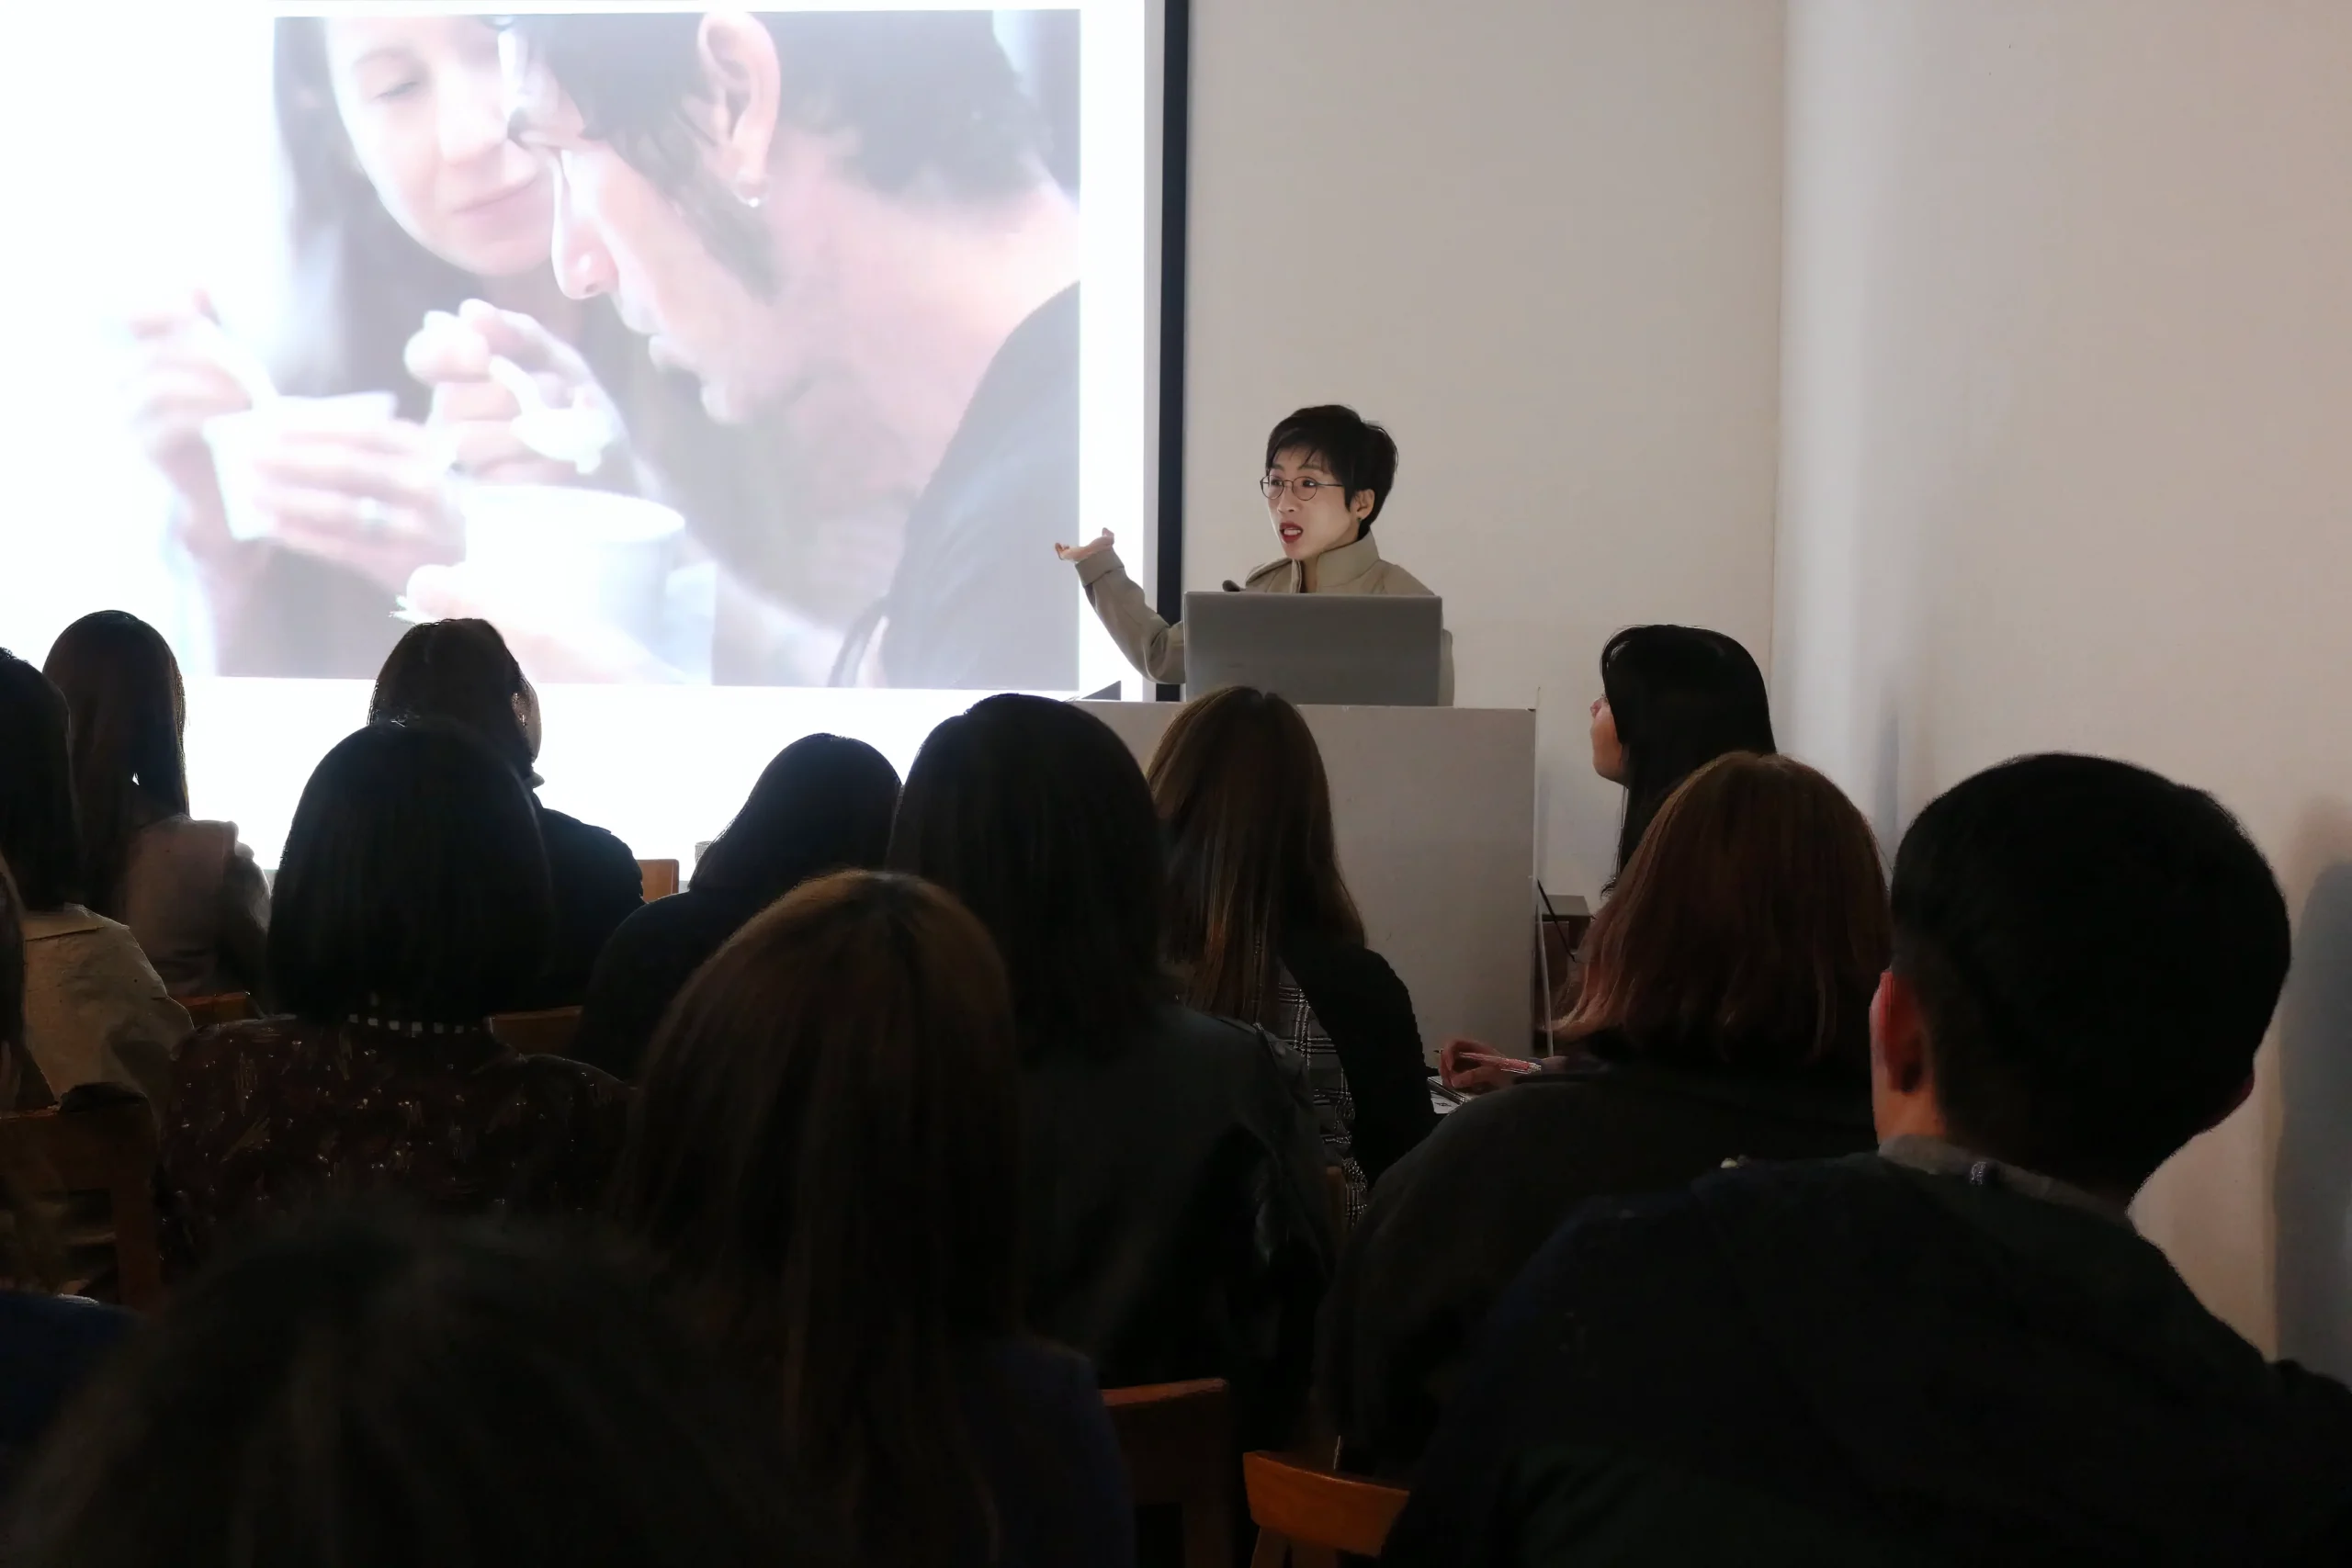 Kang Sumi – The Heterotopia of the Relationship Contemporary art and Performativity talk, Total Museum of Contemporary Art, Seoul, South Korea